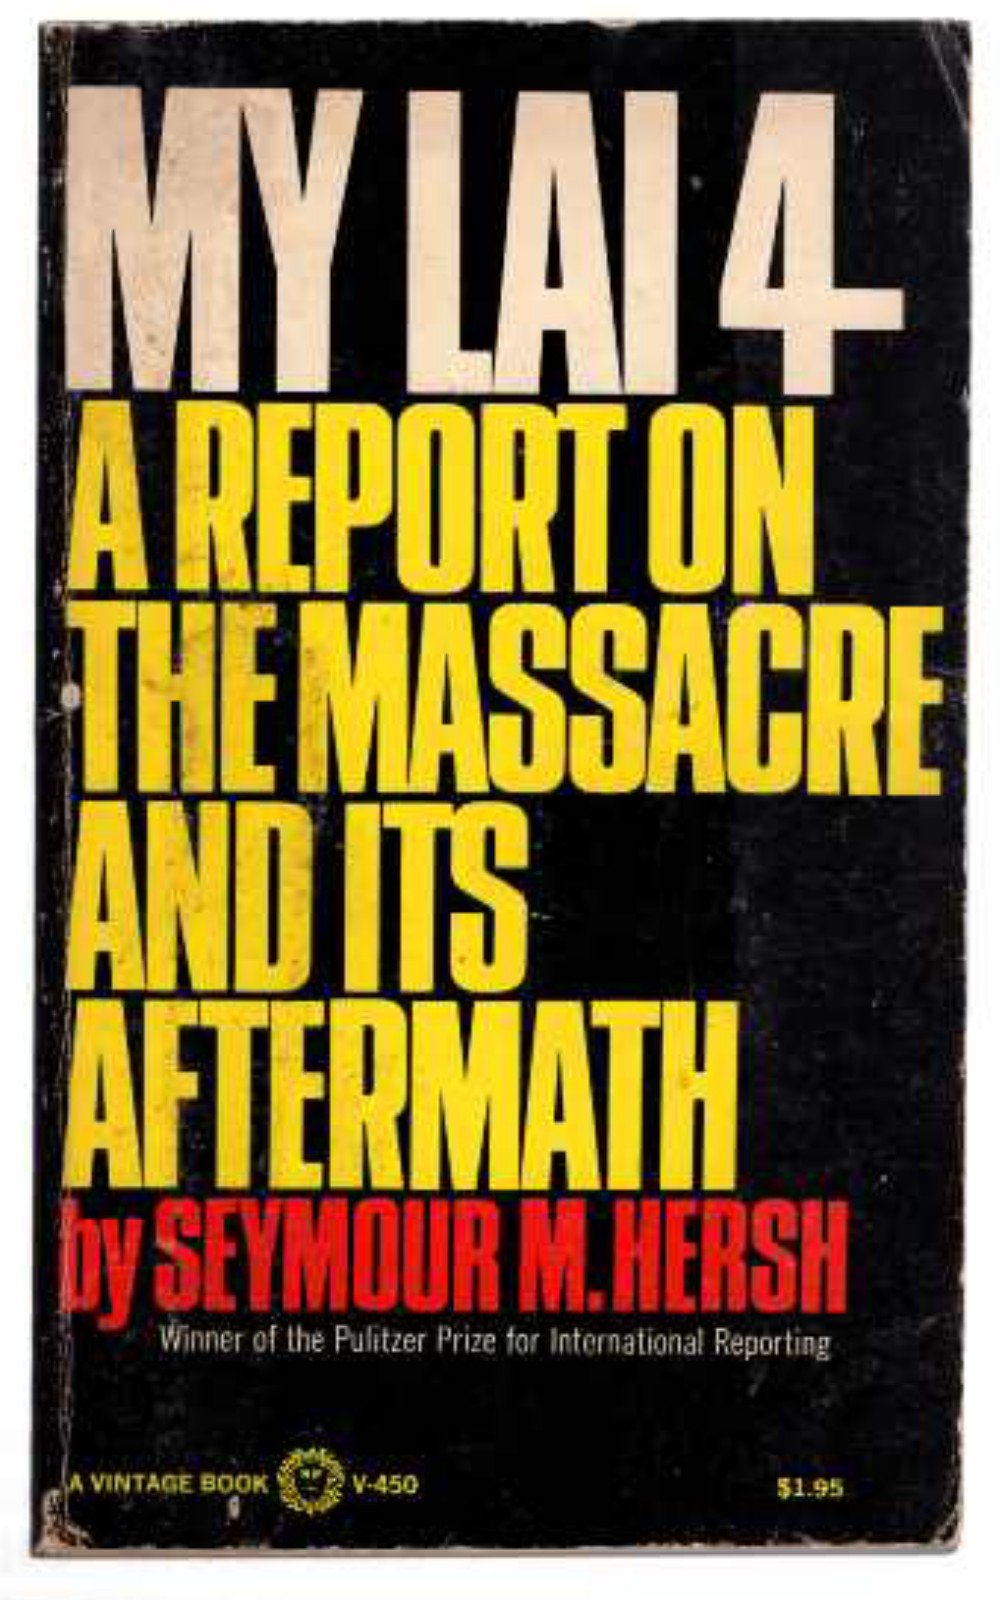 My Lai 4: A Report on the Massacre and Its Aftermath